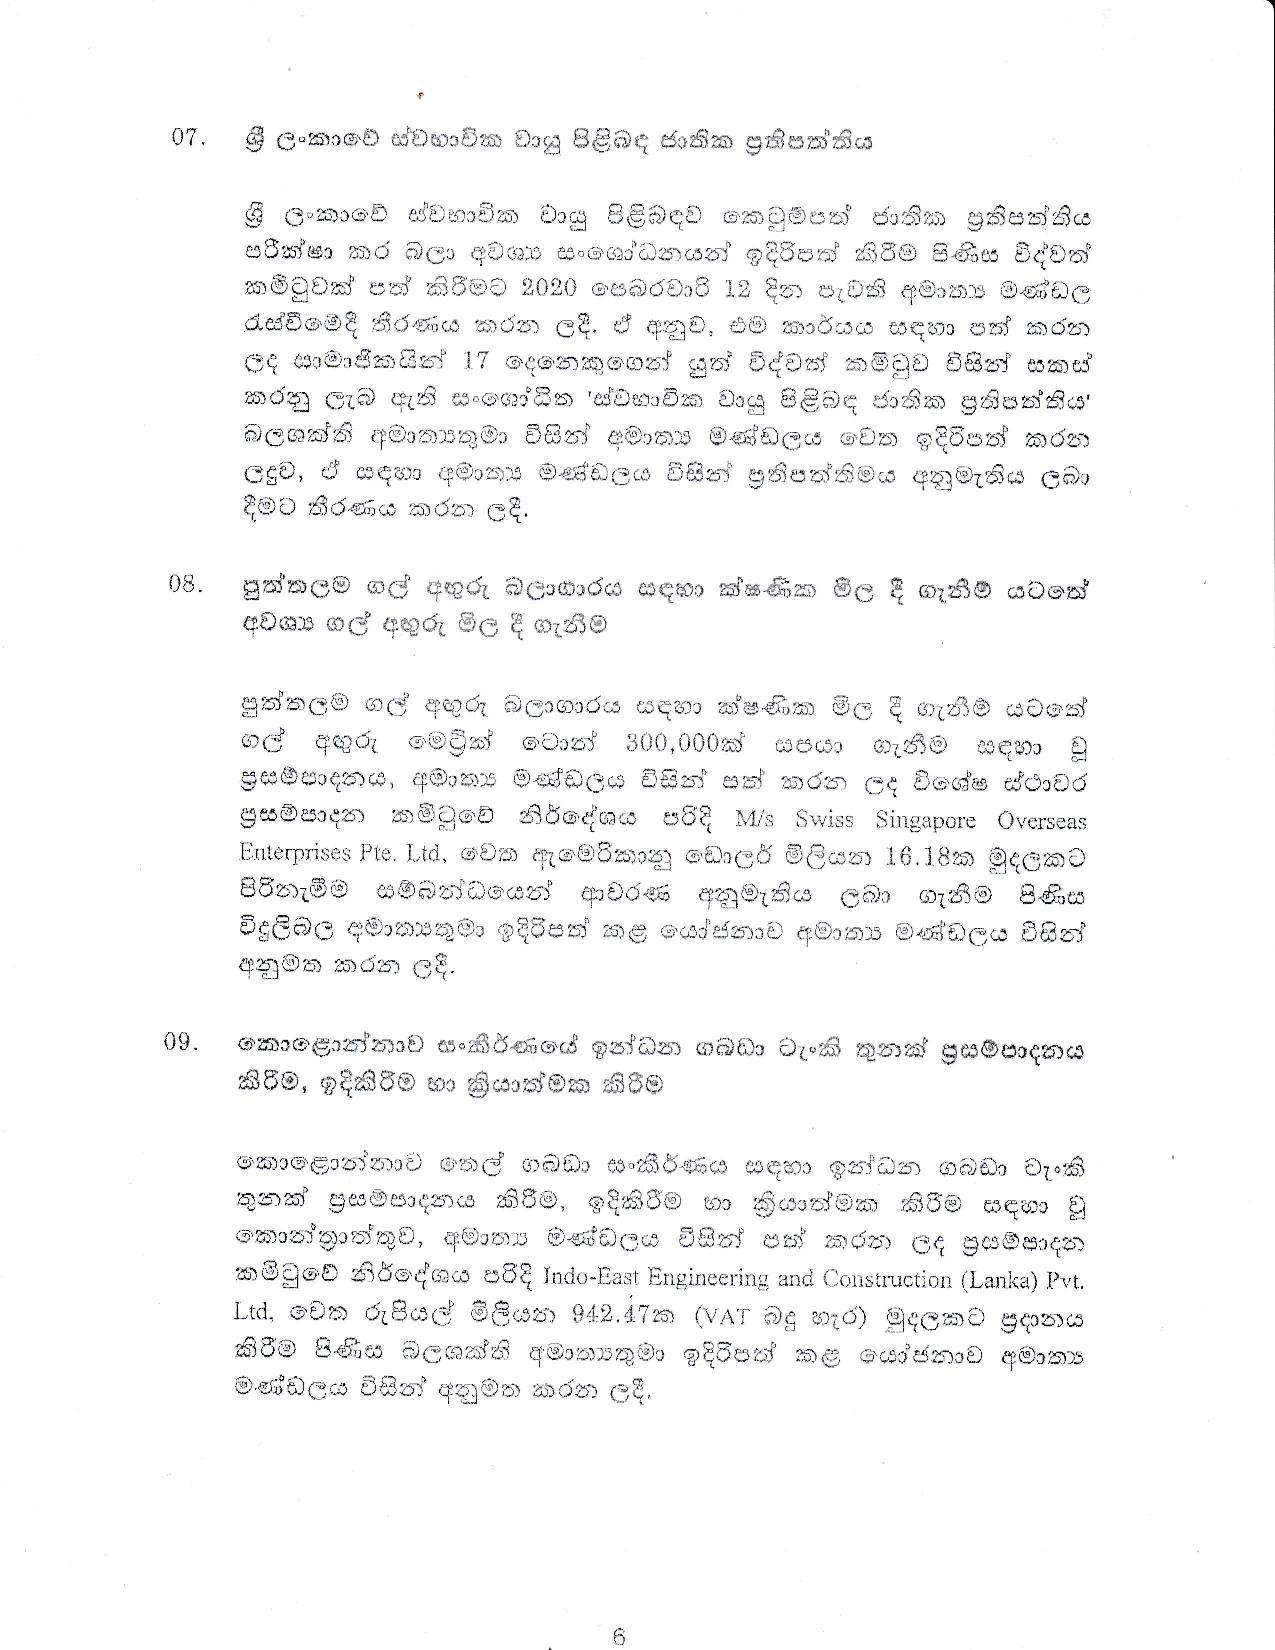 Cabinet Decision on 02.09.2020 Sinhala page 006